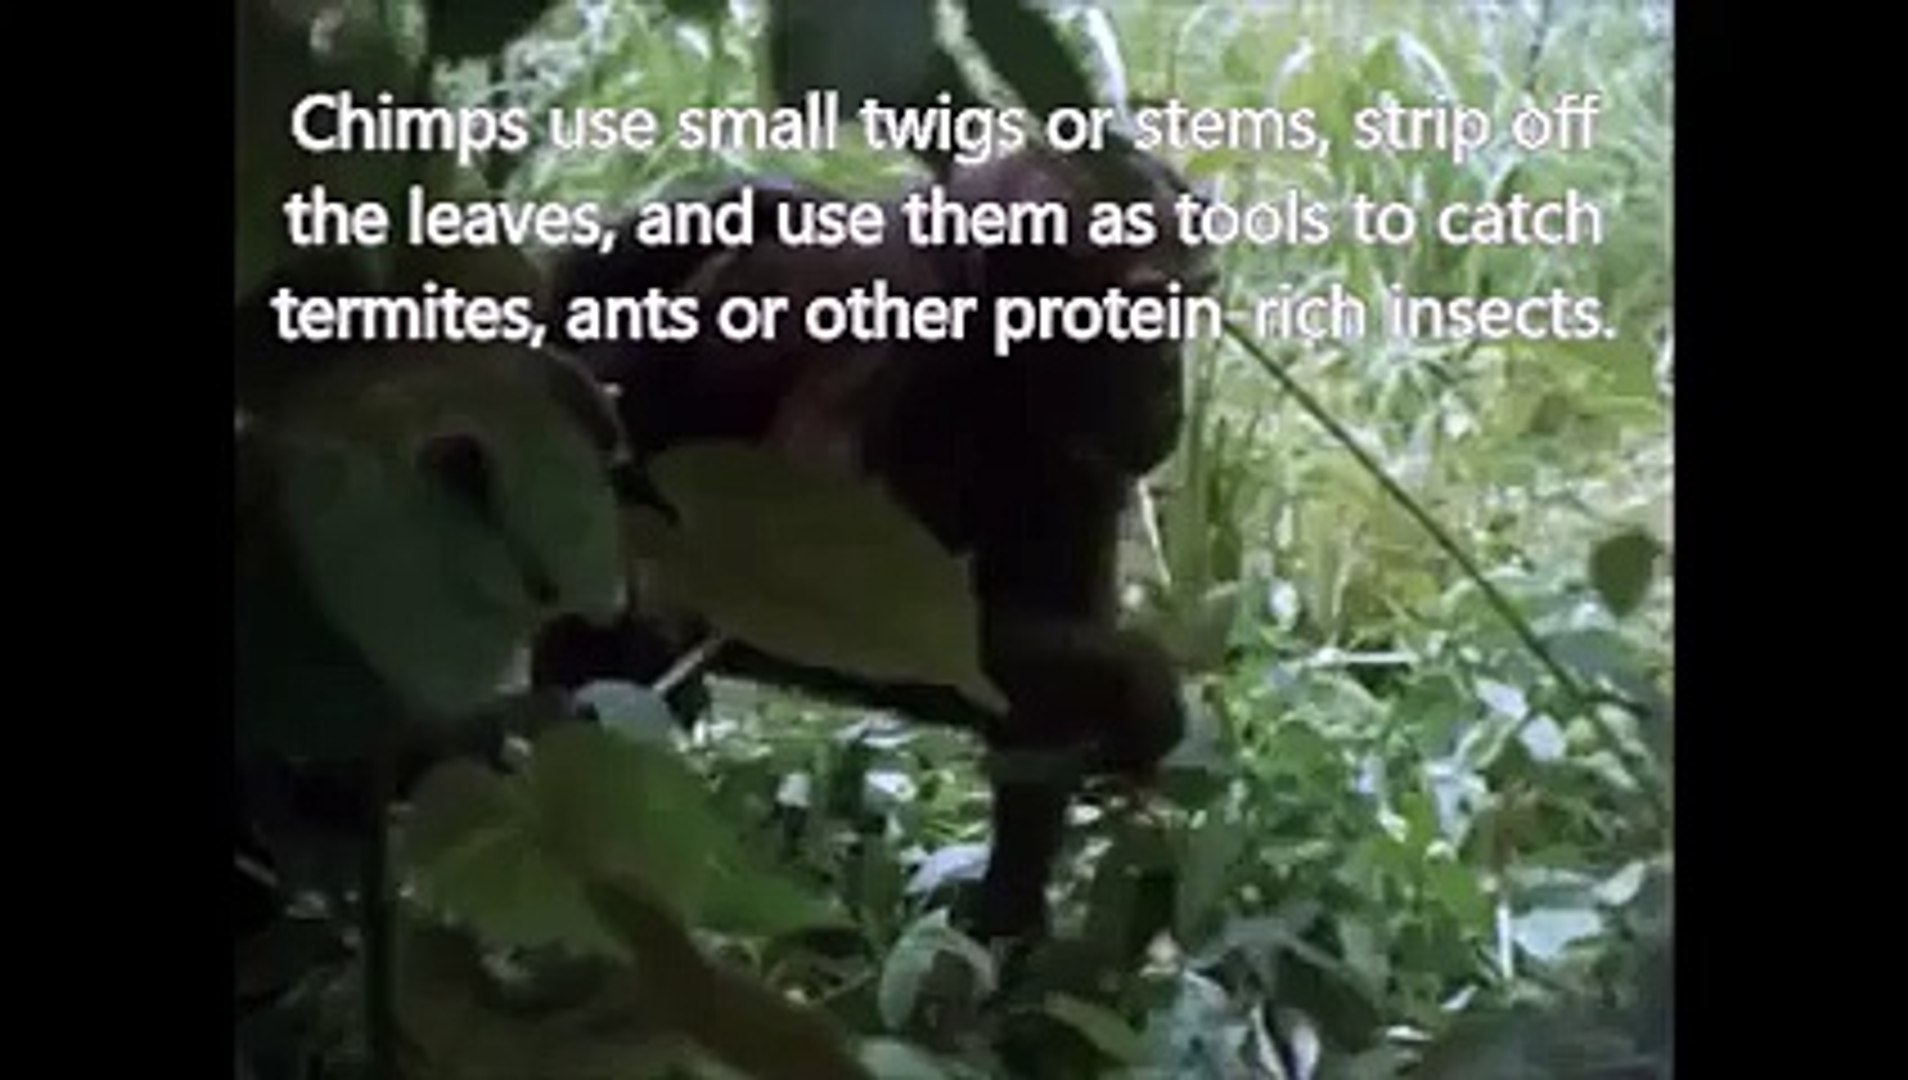 Video 8: Diet and tool use by chimpanzees